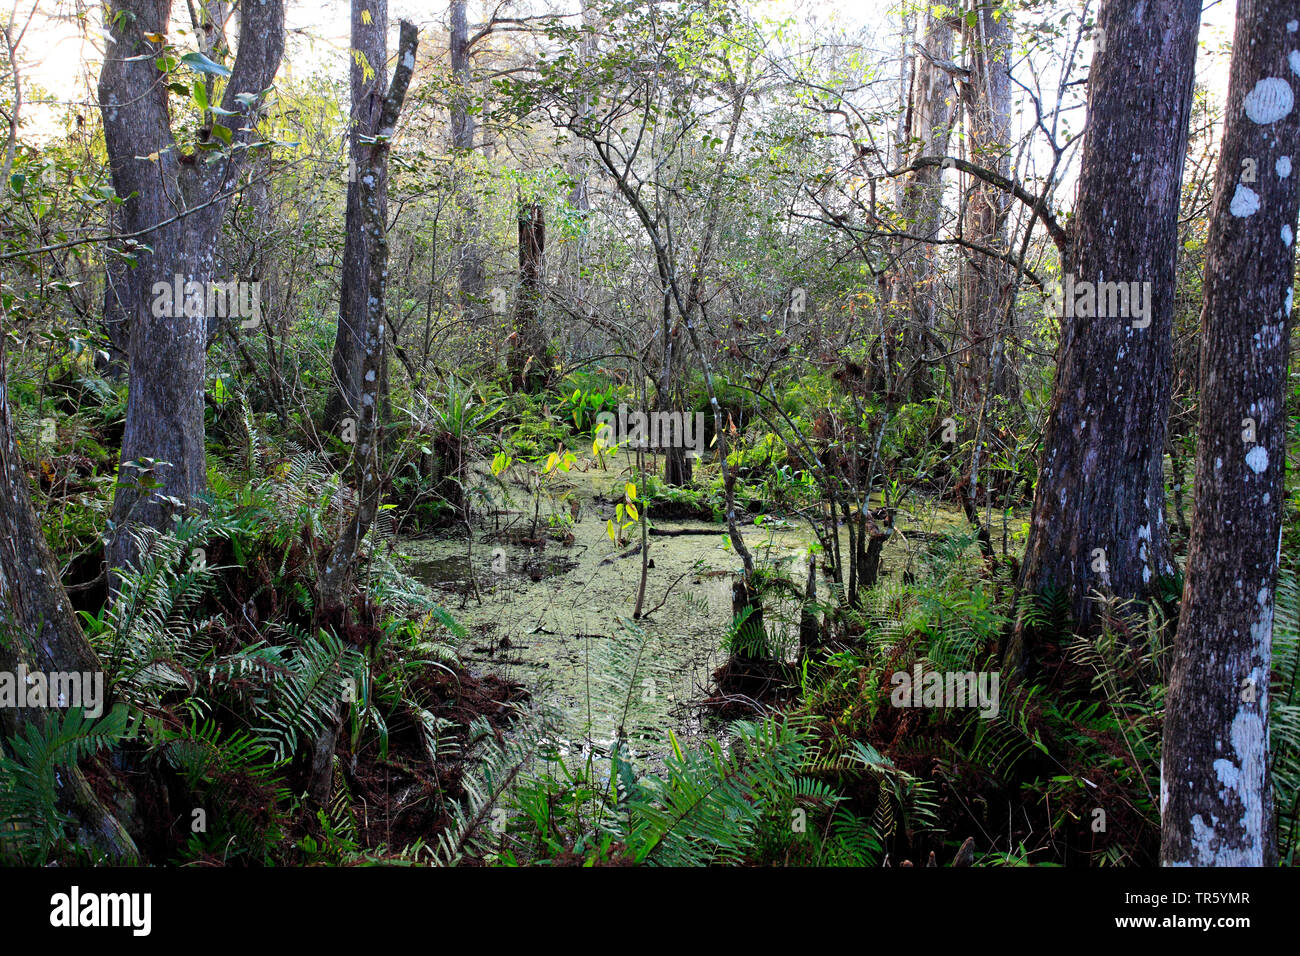 baldcypress, bald-cypress, southern cypress, tidewater cypress, red cypress, swamp cypress (Taxodium distichum), forest in the Corkscrew Swamp Sanctuary, USA, Florida Stock Photo